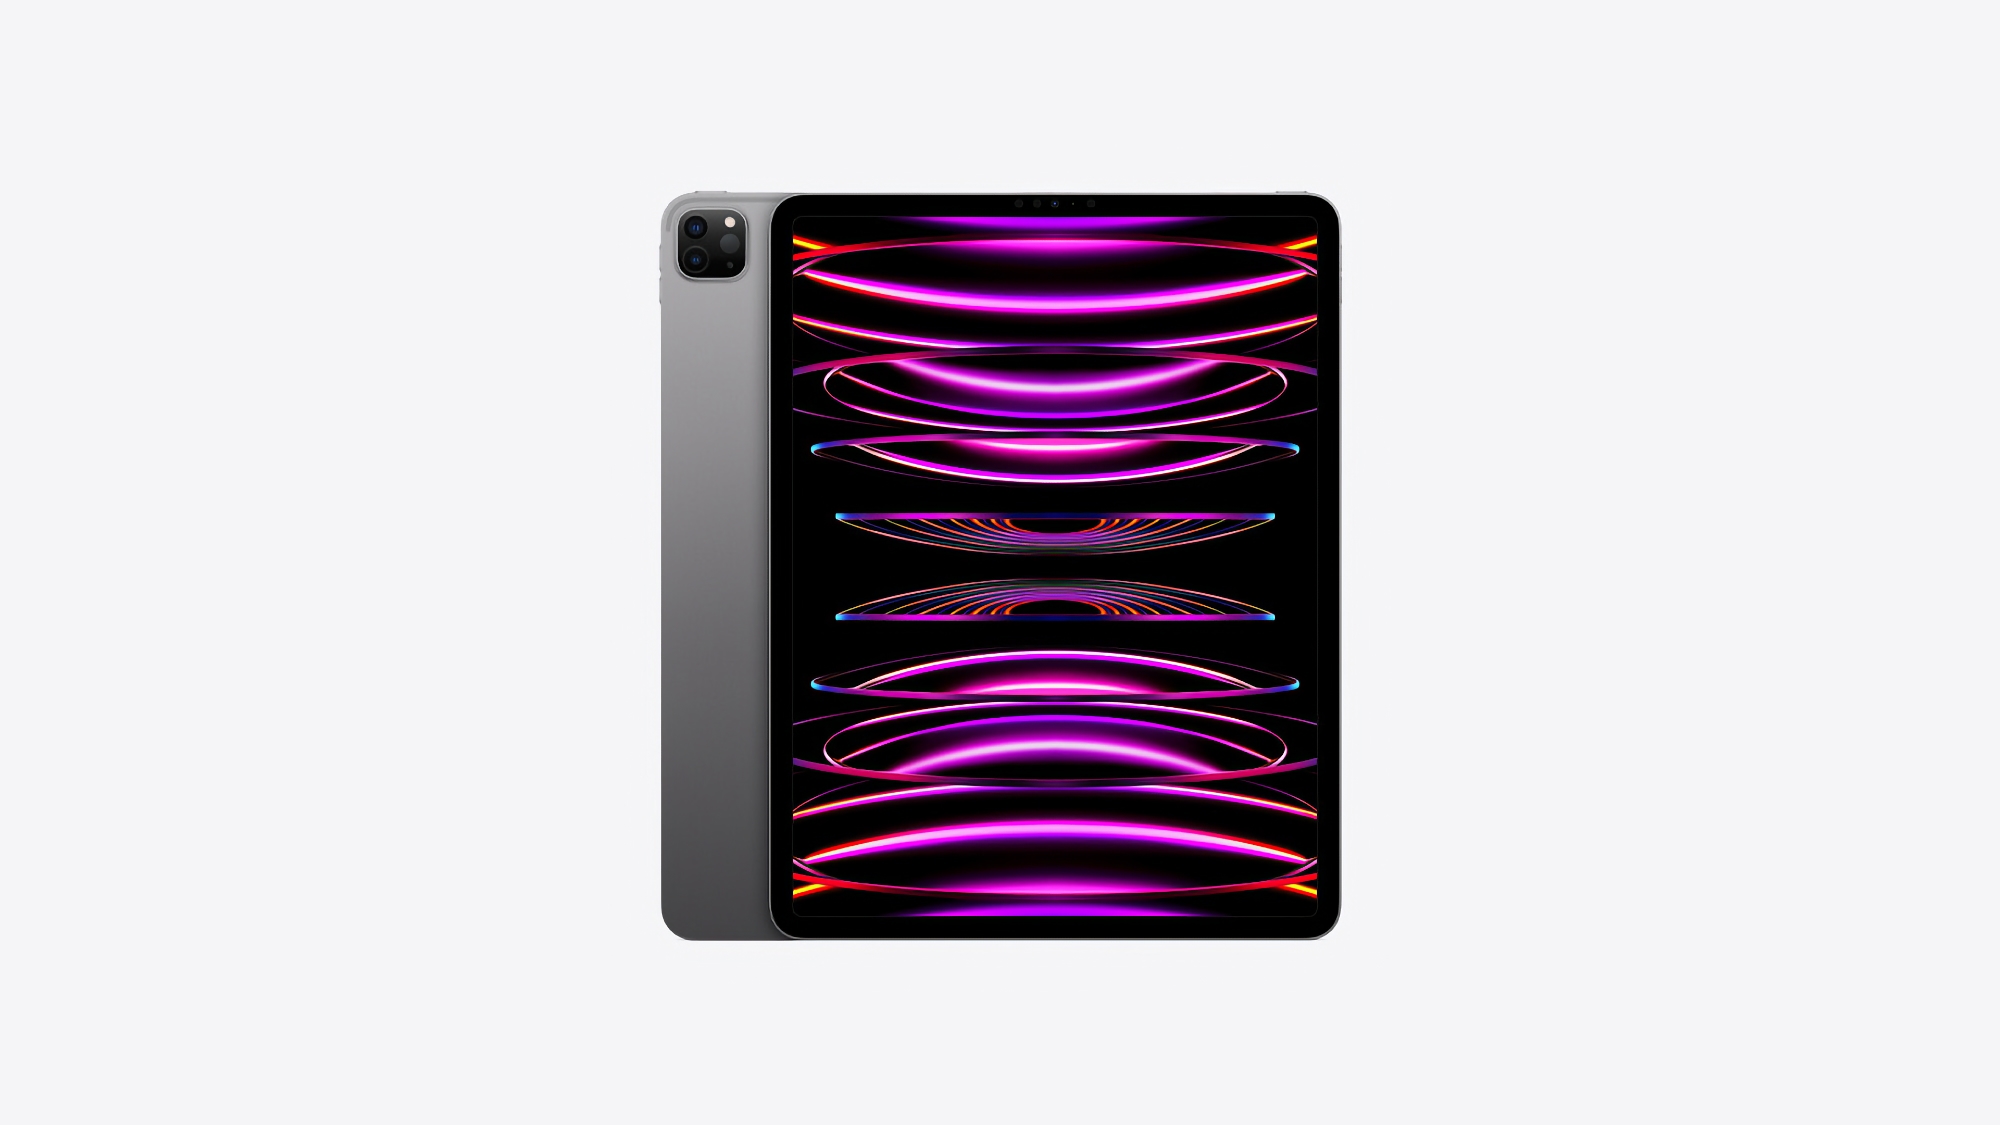 Insider: new iPad Pro will get the best OLED screens on the market